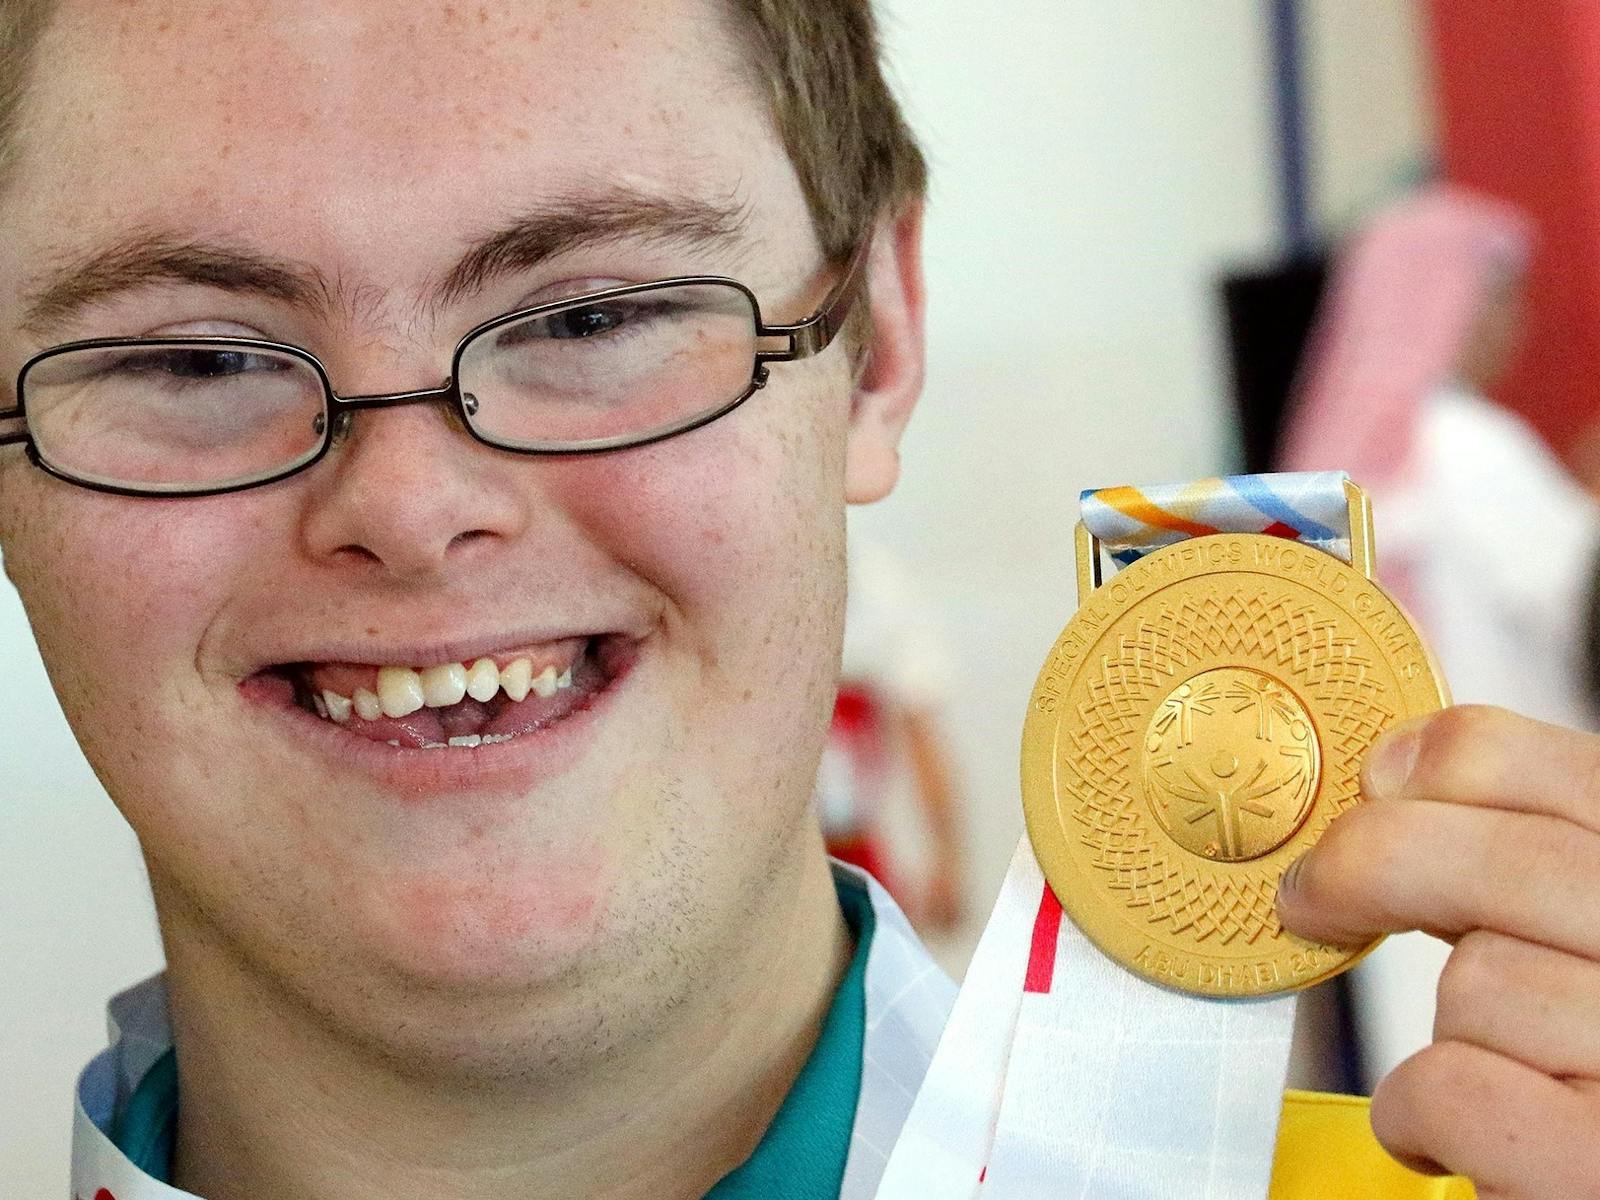 person smiling holding gold medal.